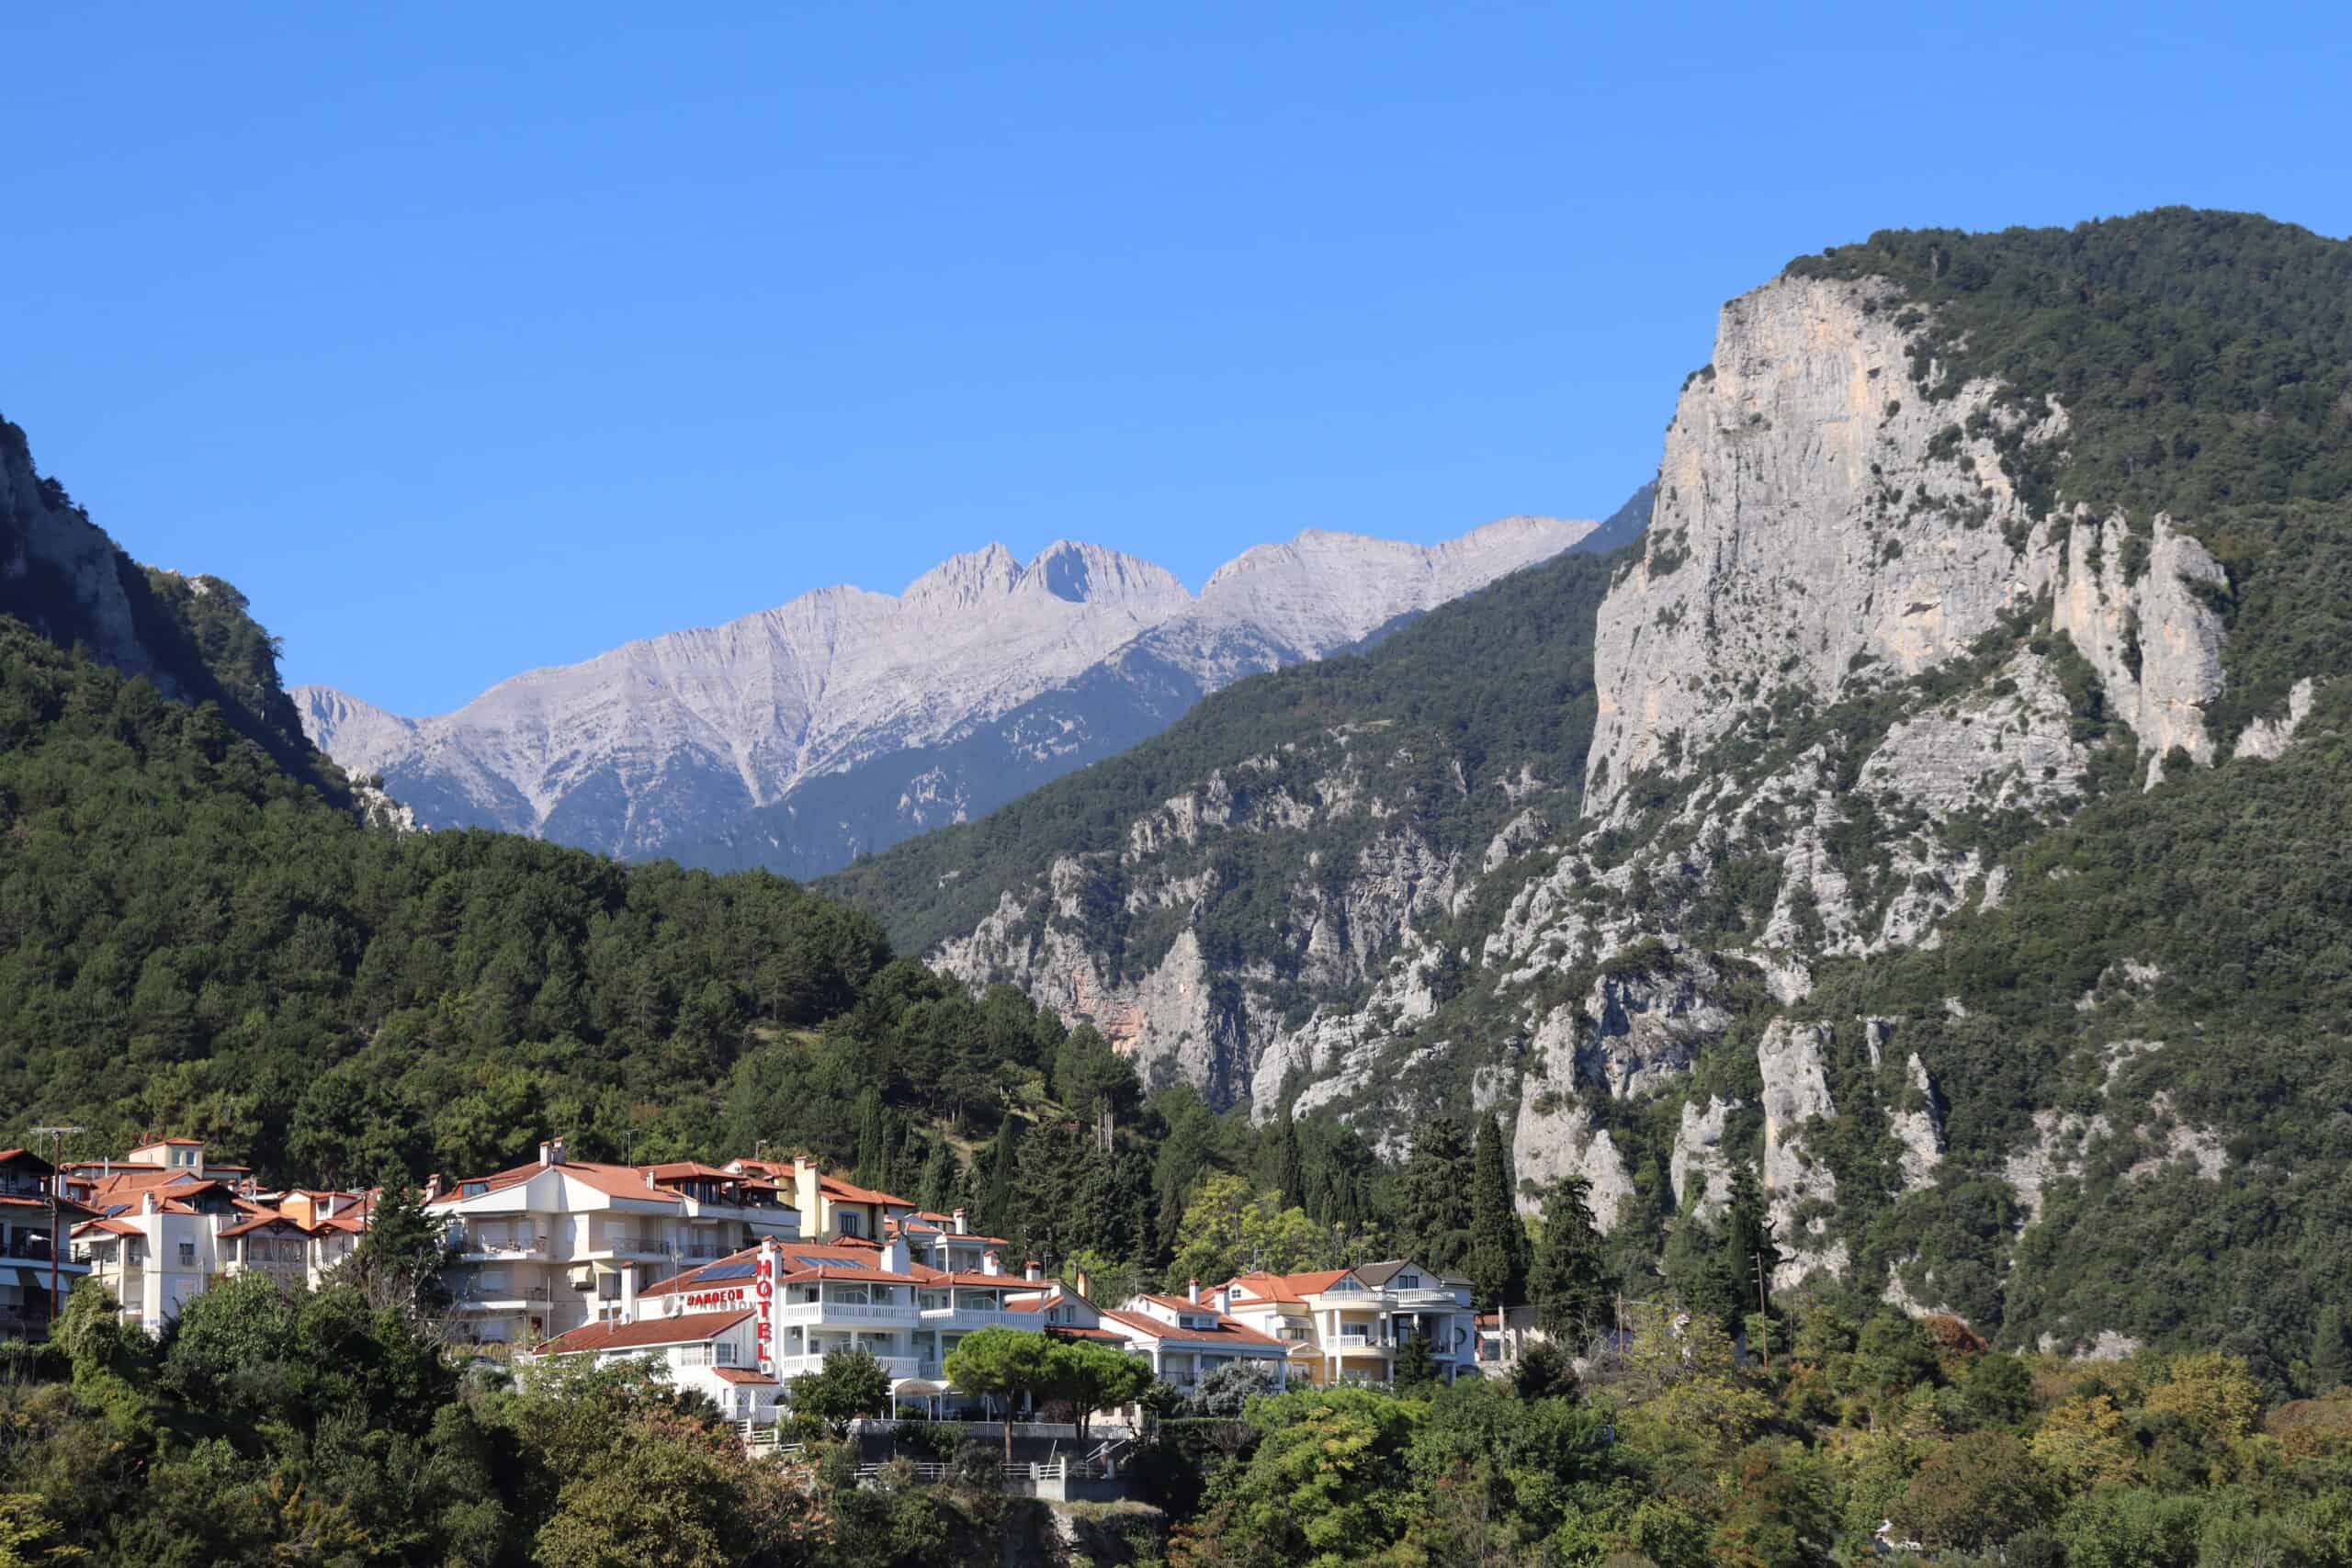 Look for Mytikas Peak when visiting the town of Litochoro.